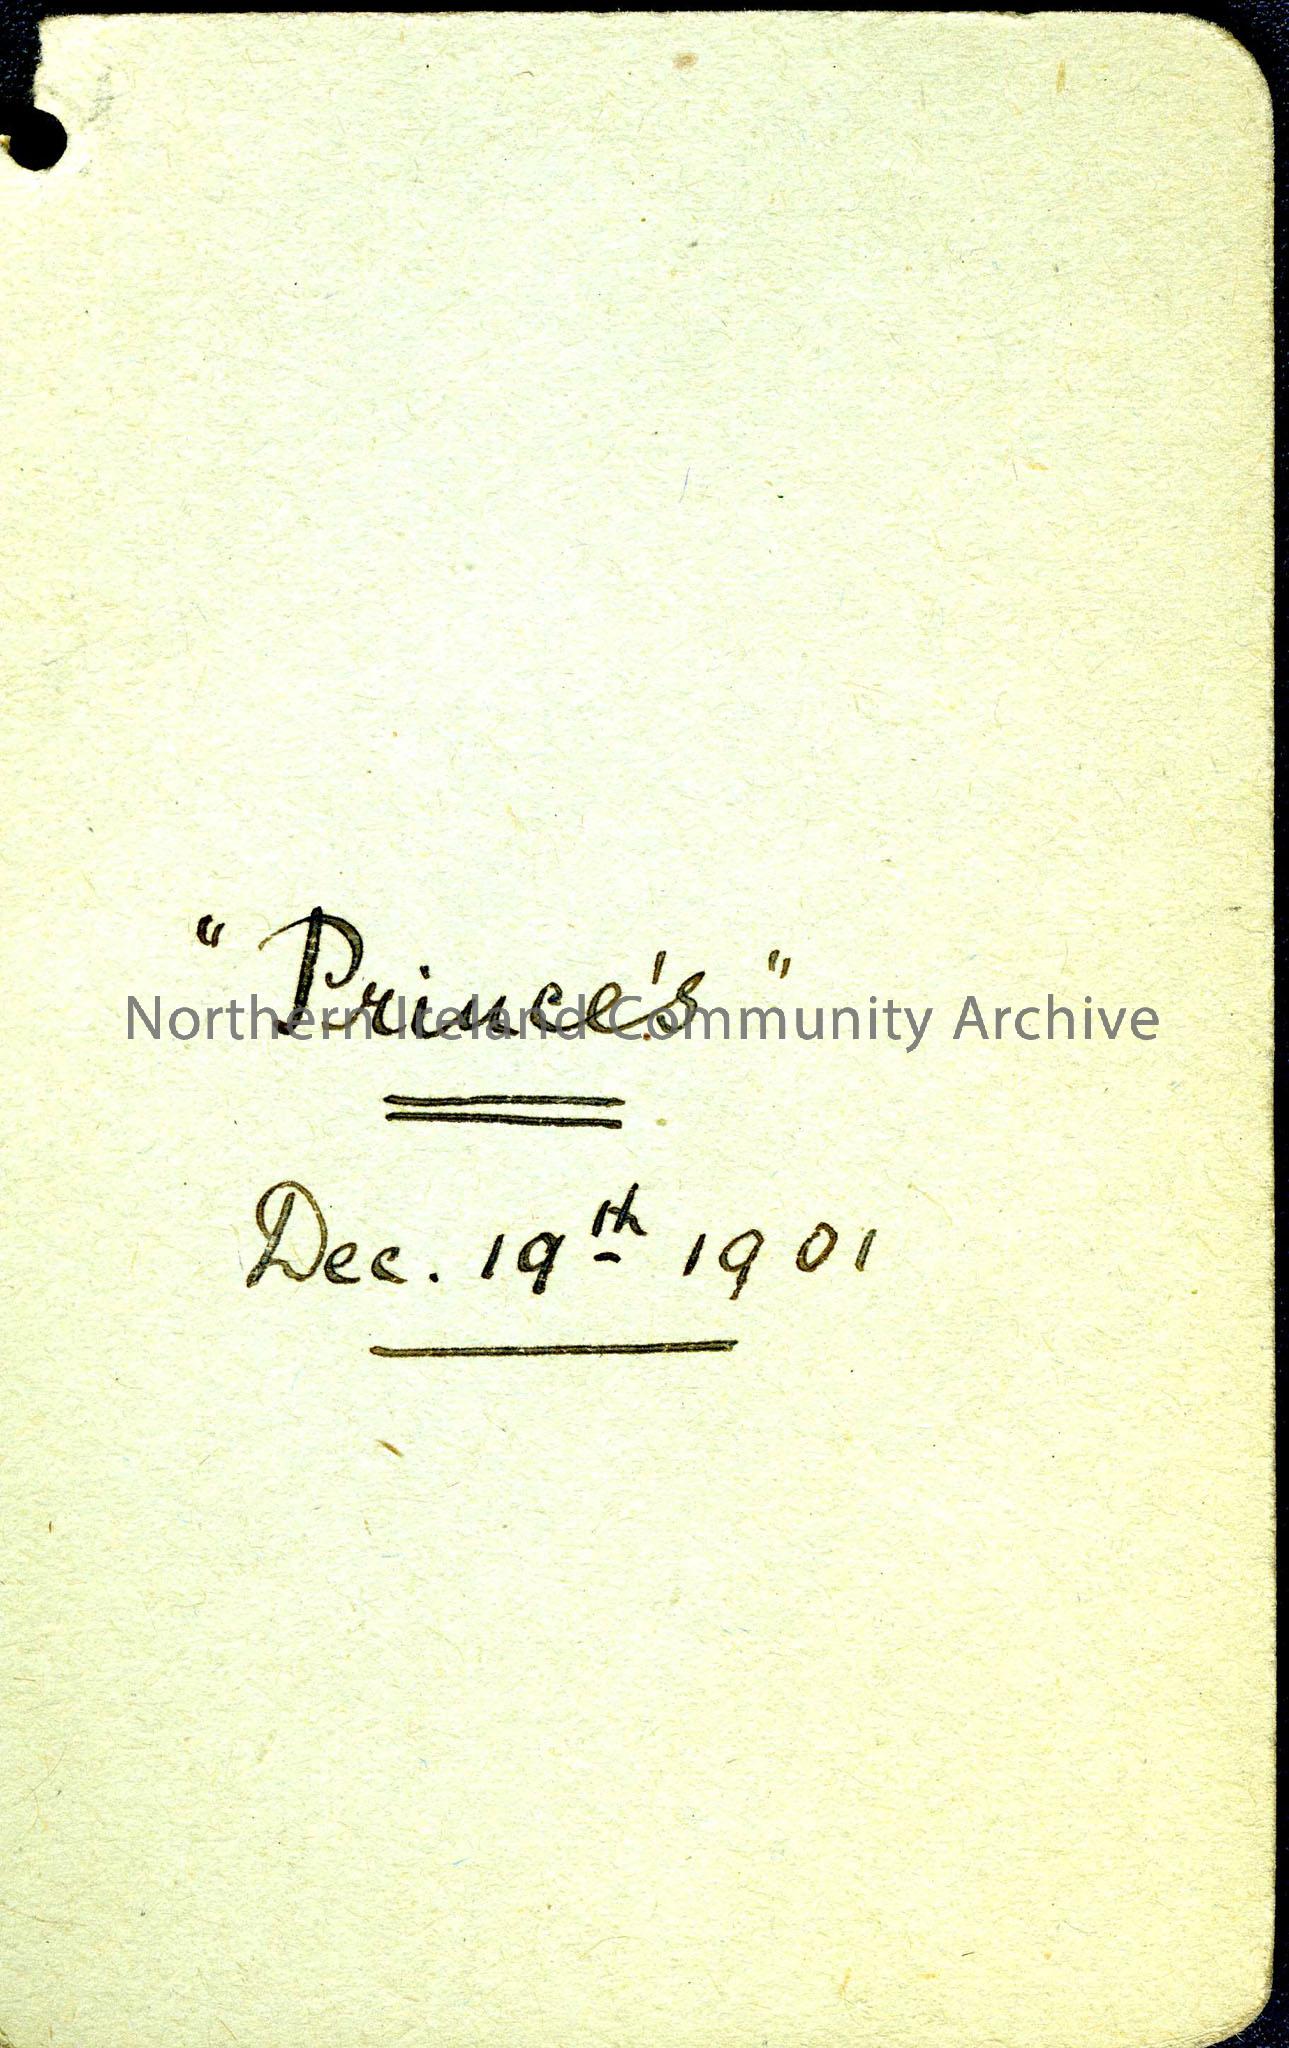 Dance card or programme. “Prince’s” 19th December 1901.